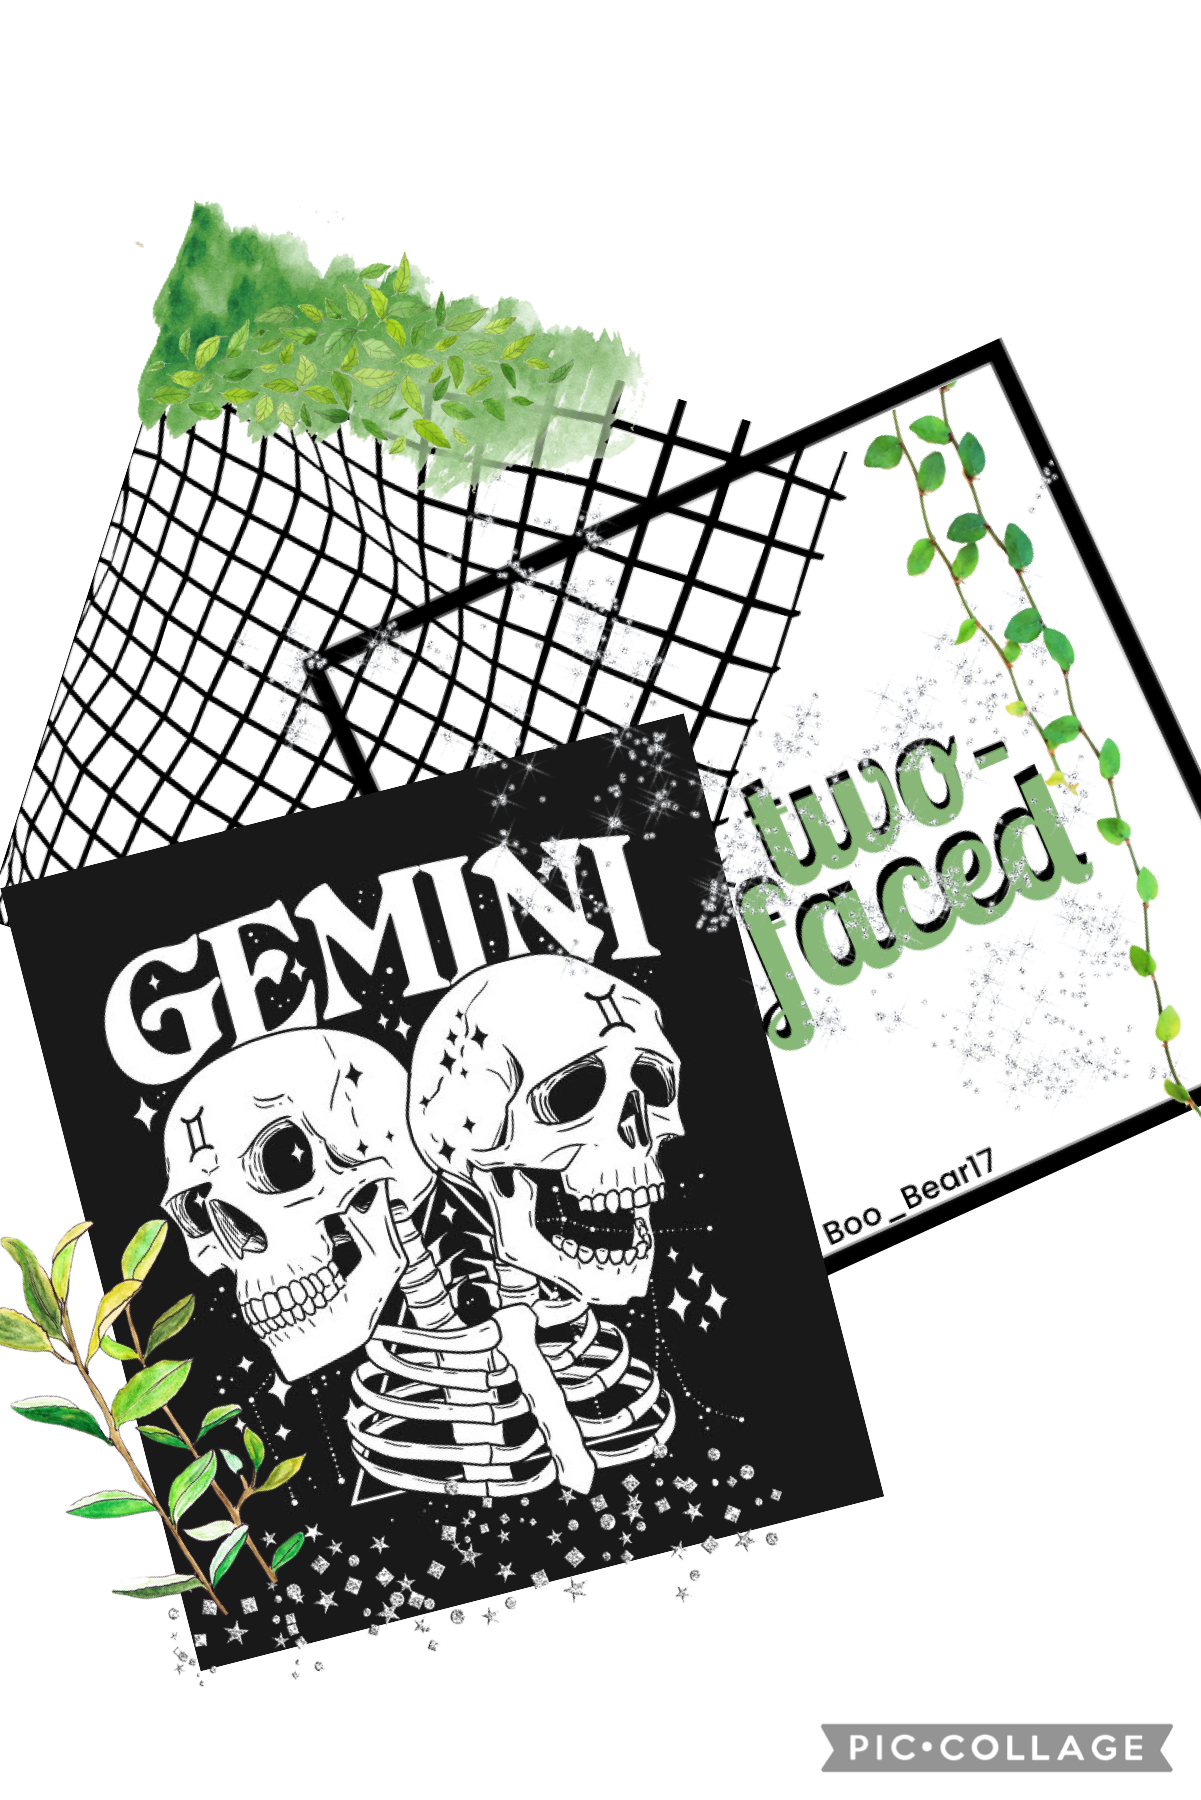 🍃two-faced🍃
•long time no see :) i’m finally back after a year long break and will be back making edits and rp’s
•i’m a gemini and i hear this a lot and it was an easy edit to get back into the swing of things 
